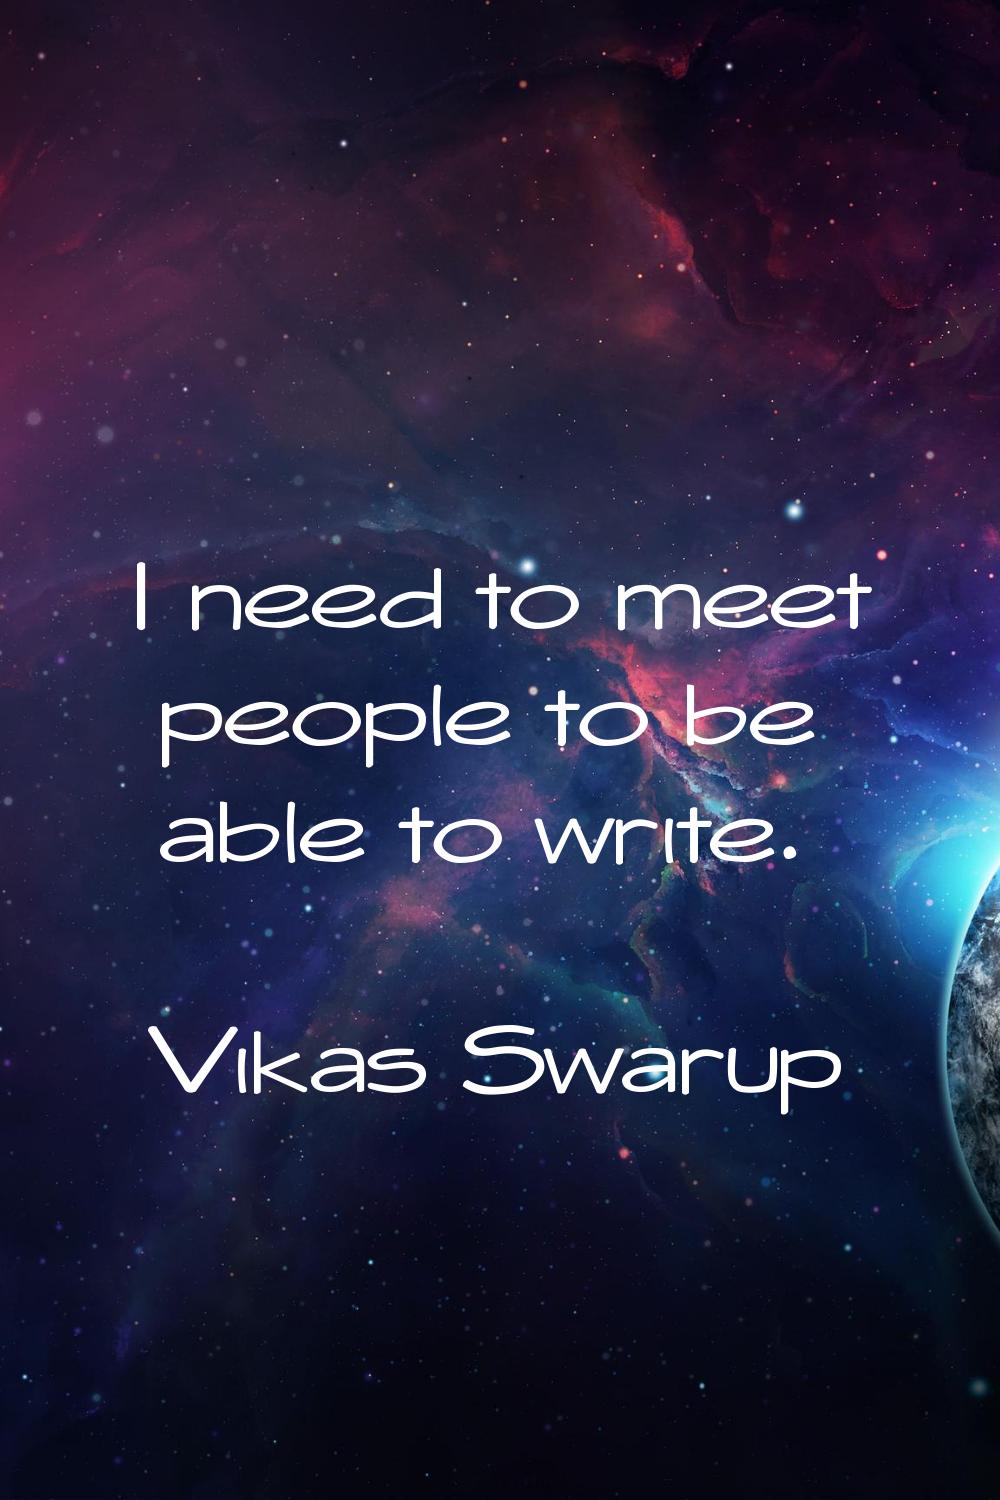 I need to meet people to be able to write.